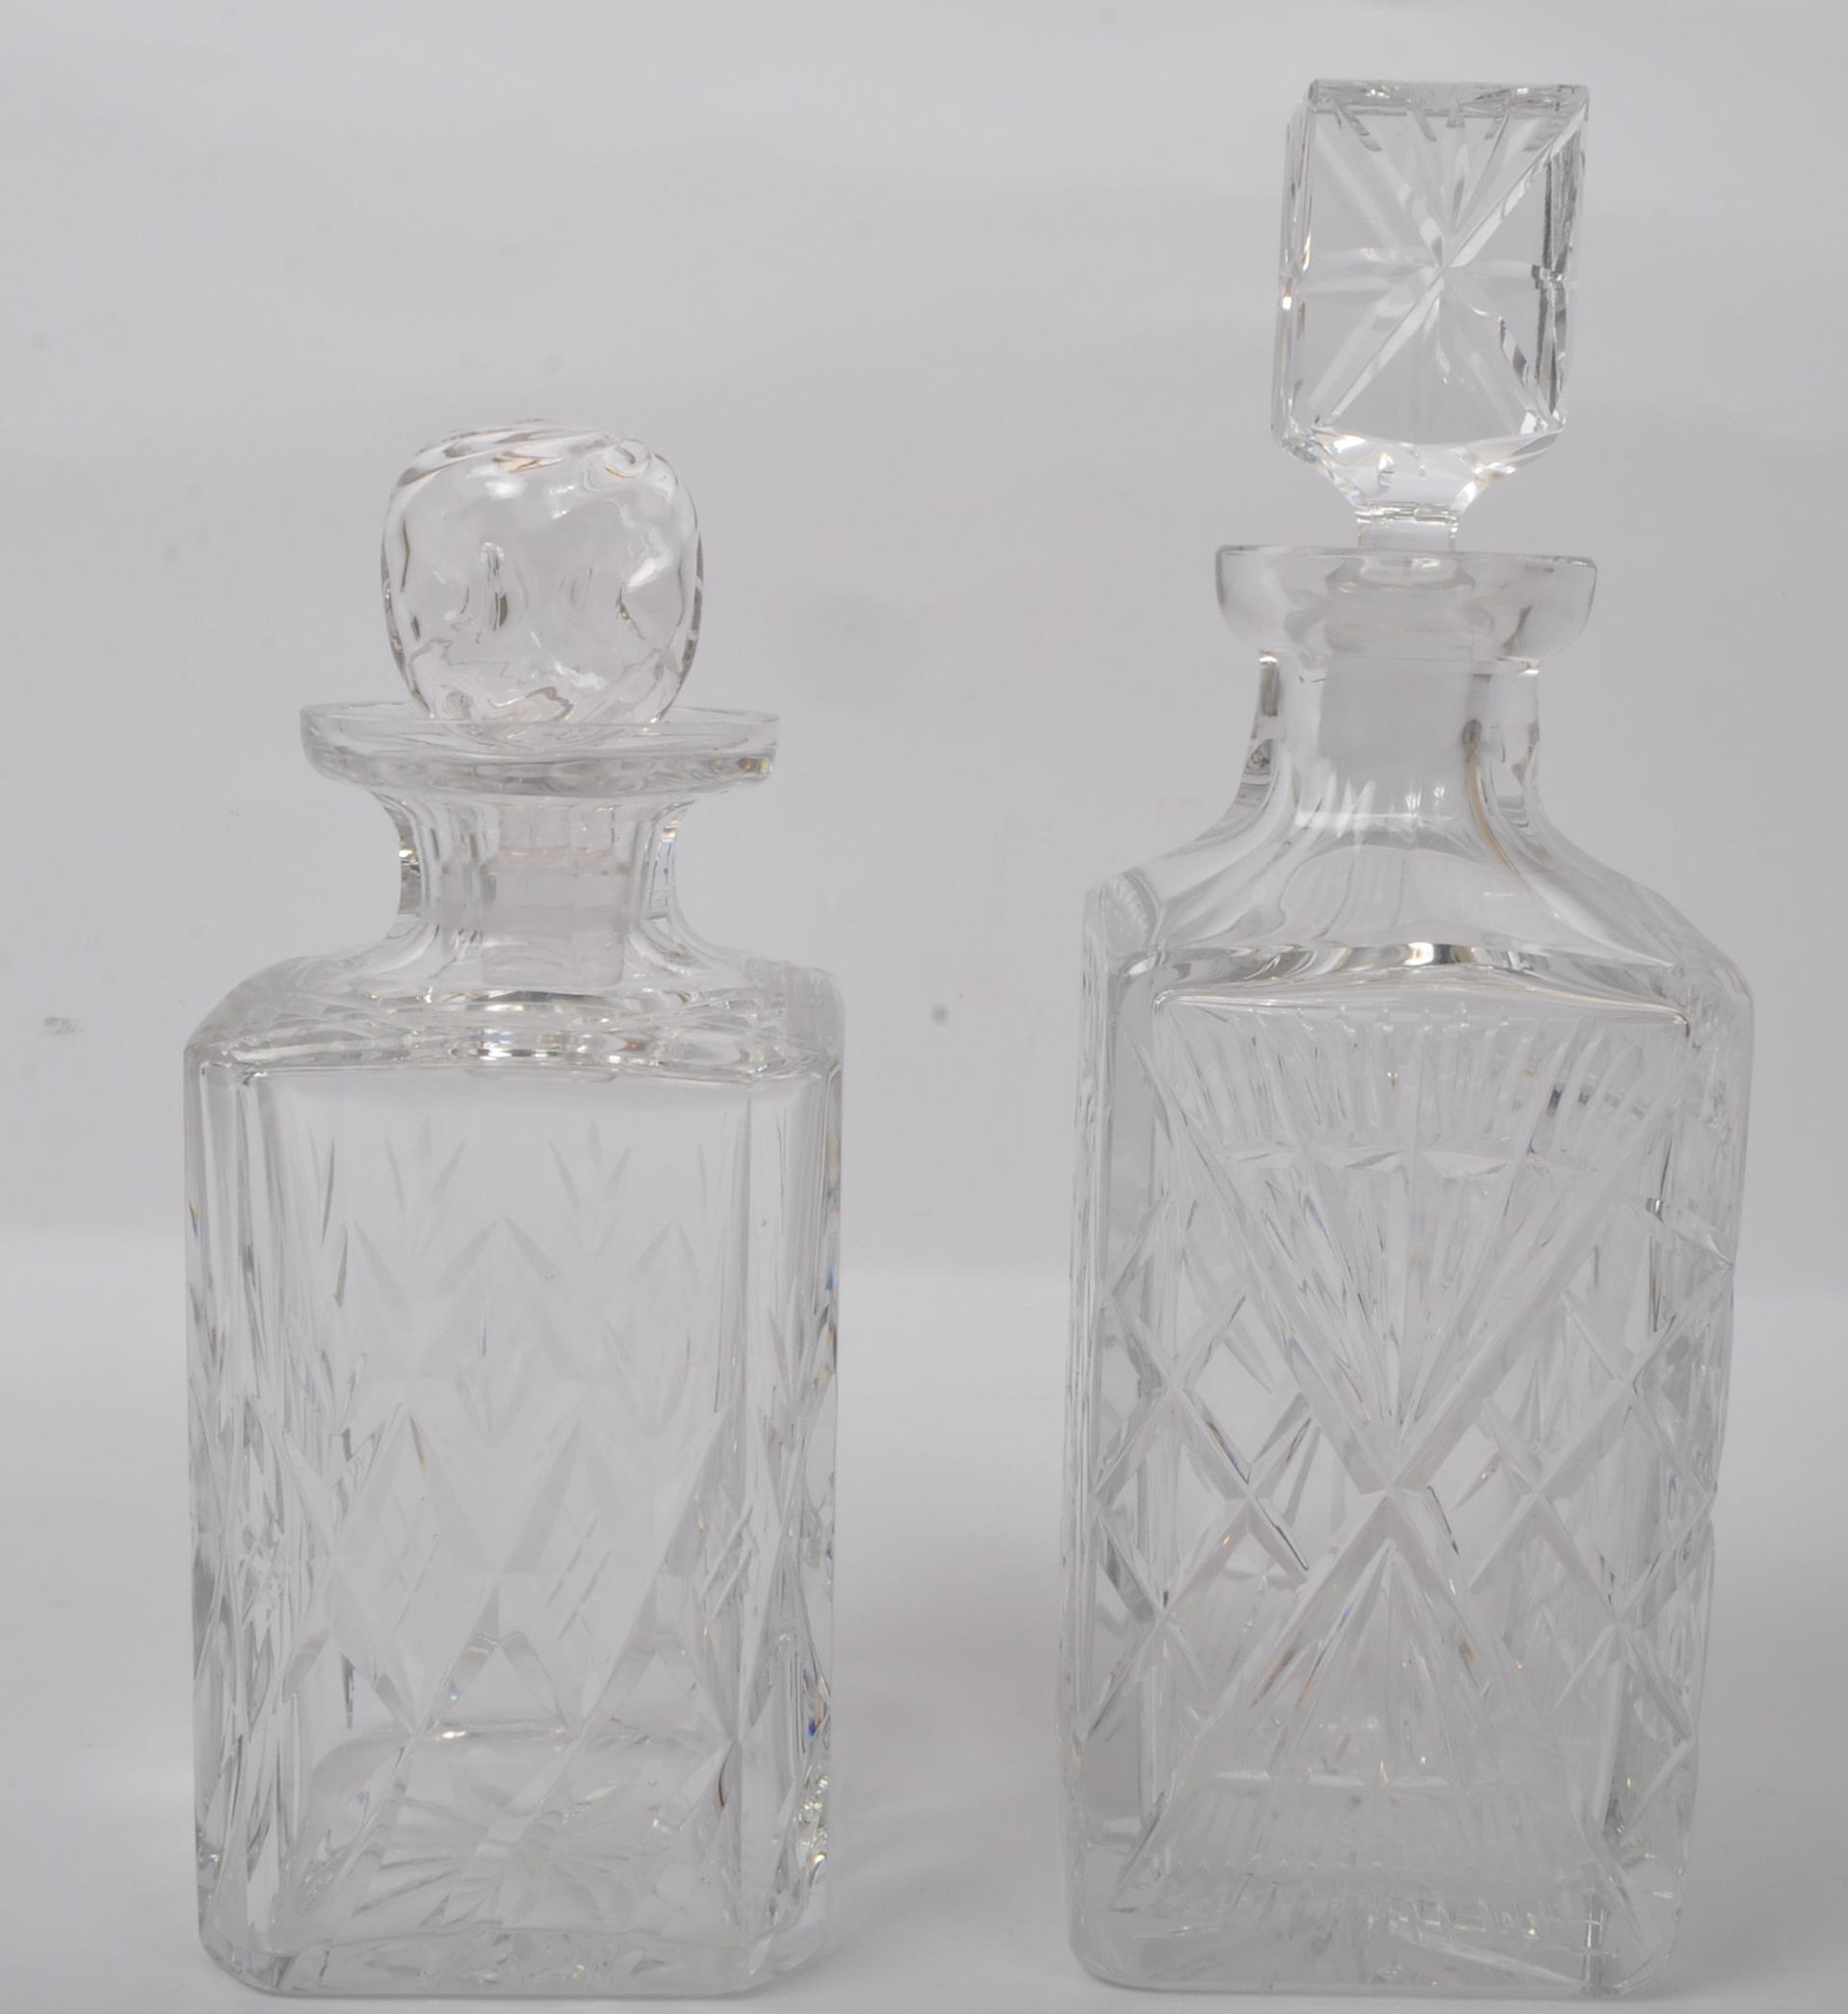 EIGHT LARGE VINTAGE CUT GLASS DECANTERS - Image 6 of 6